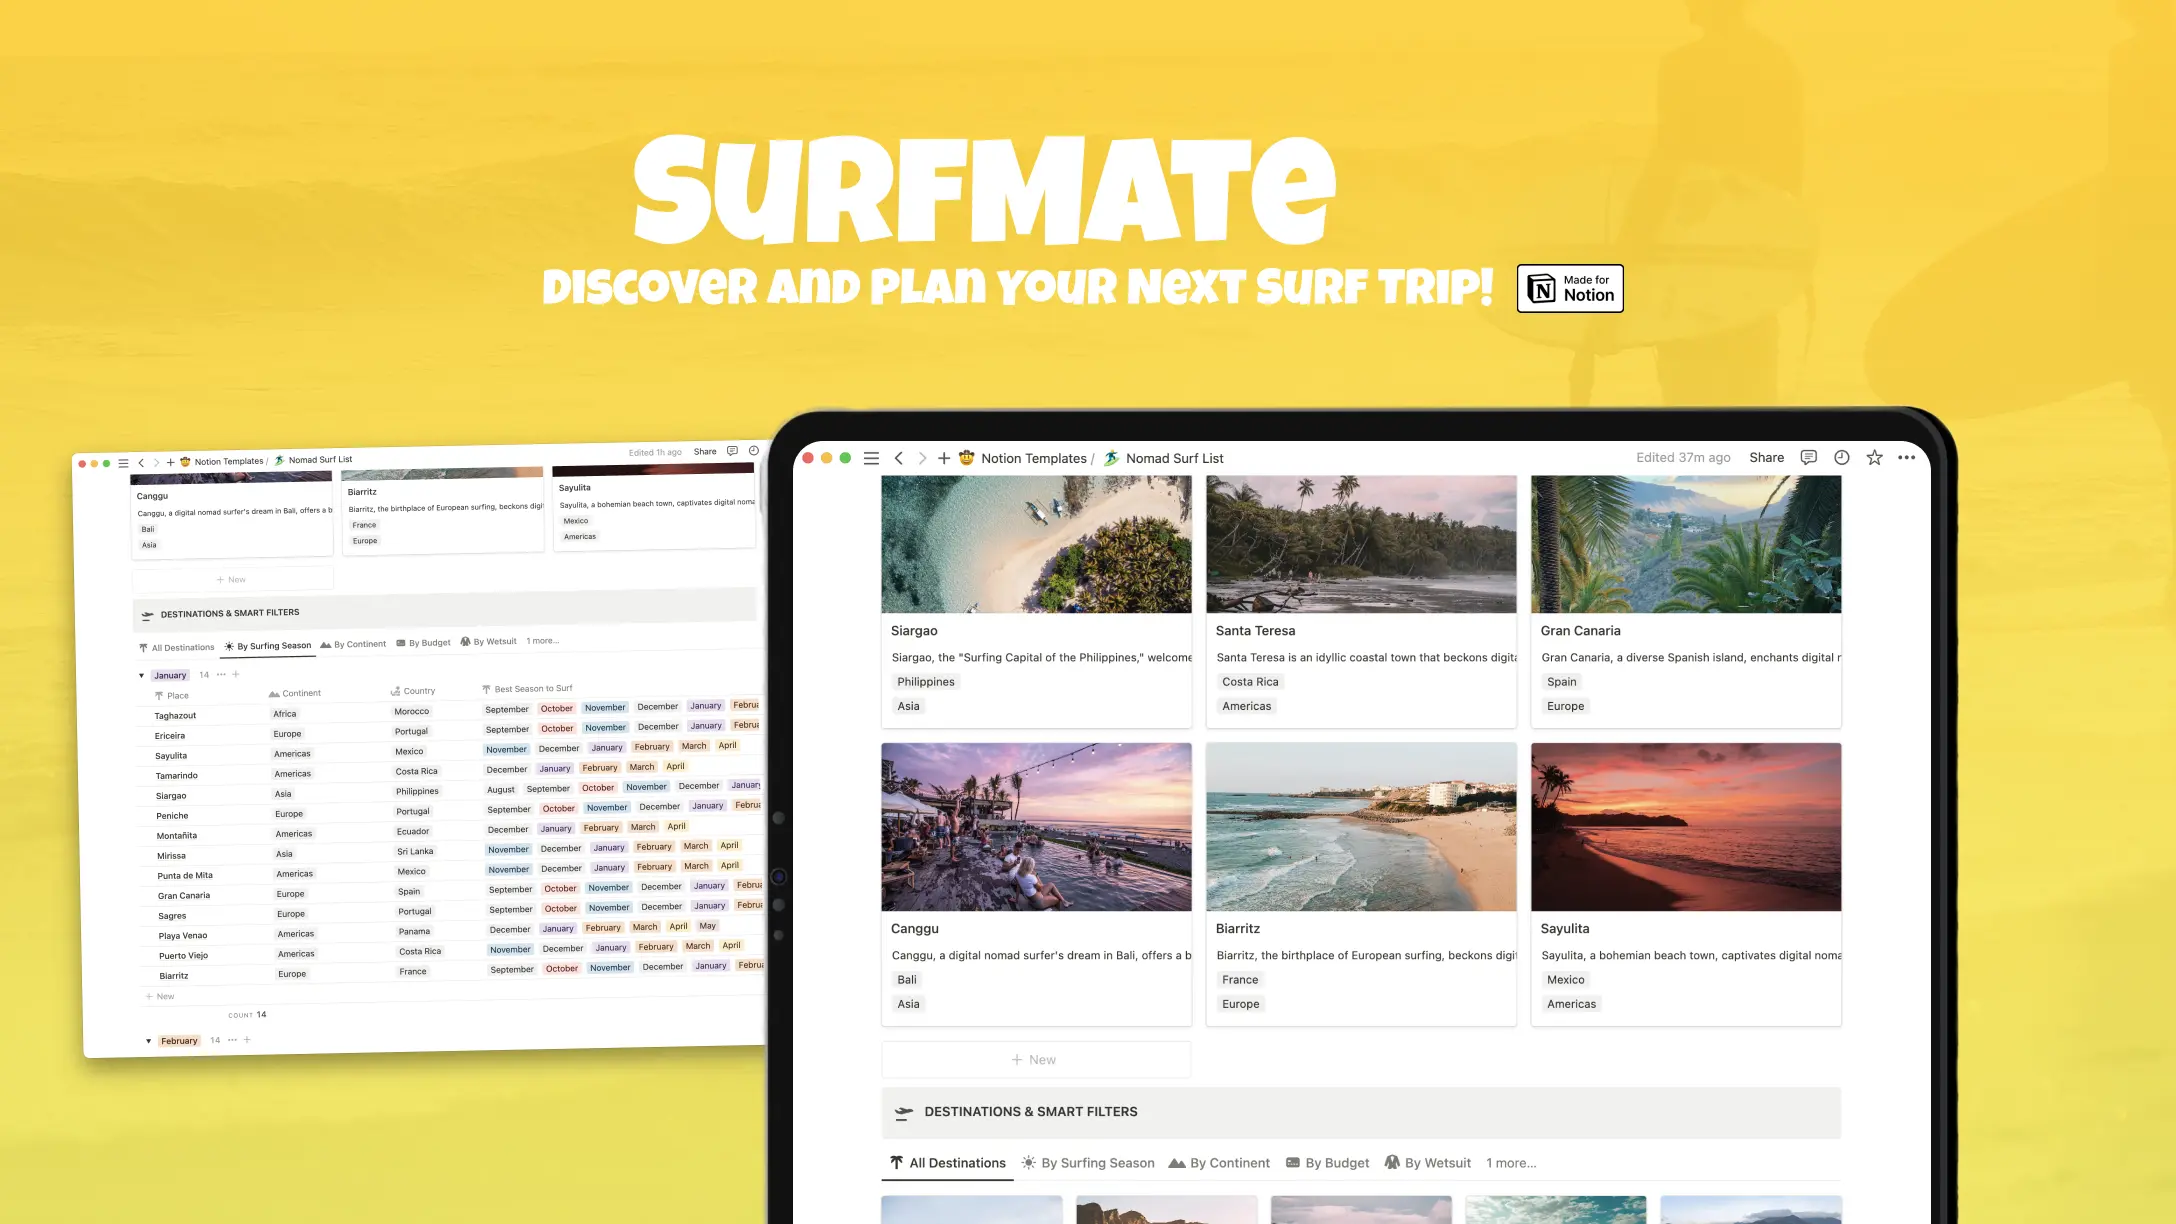 Surfmate - Discover & Plan Your Next Surf Trip image